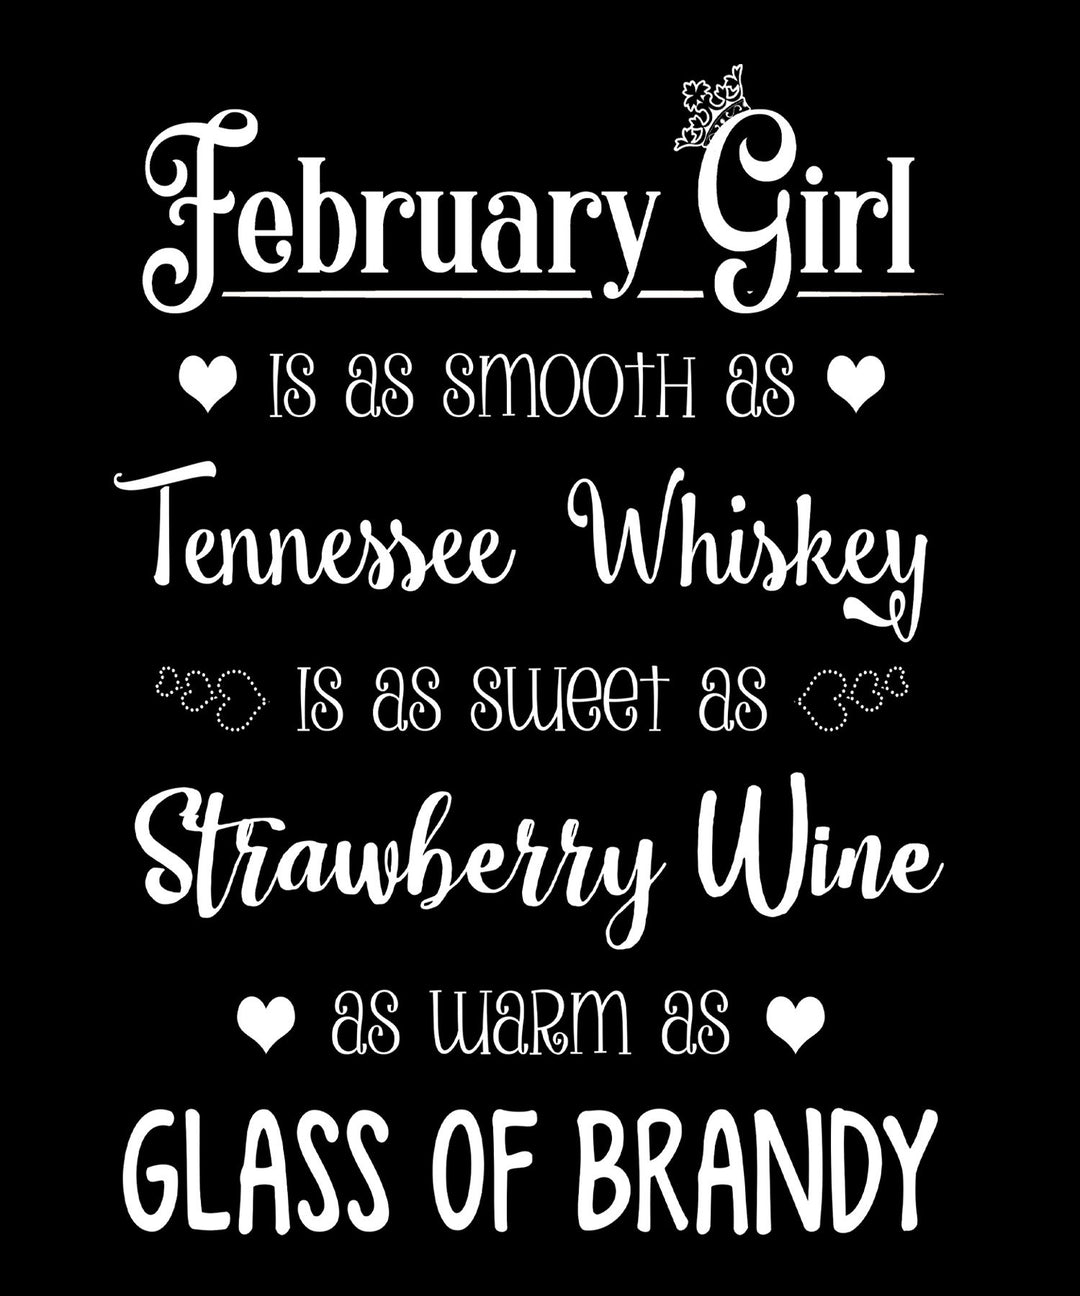 February Girl Is As Smooth As Whiskey.........As Warm As Brandy" .